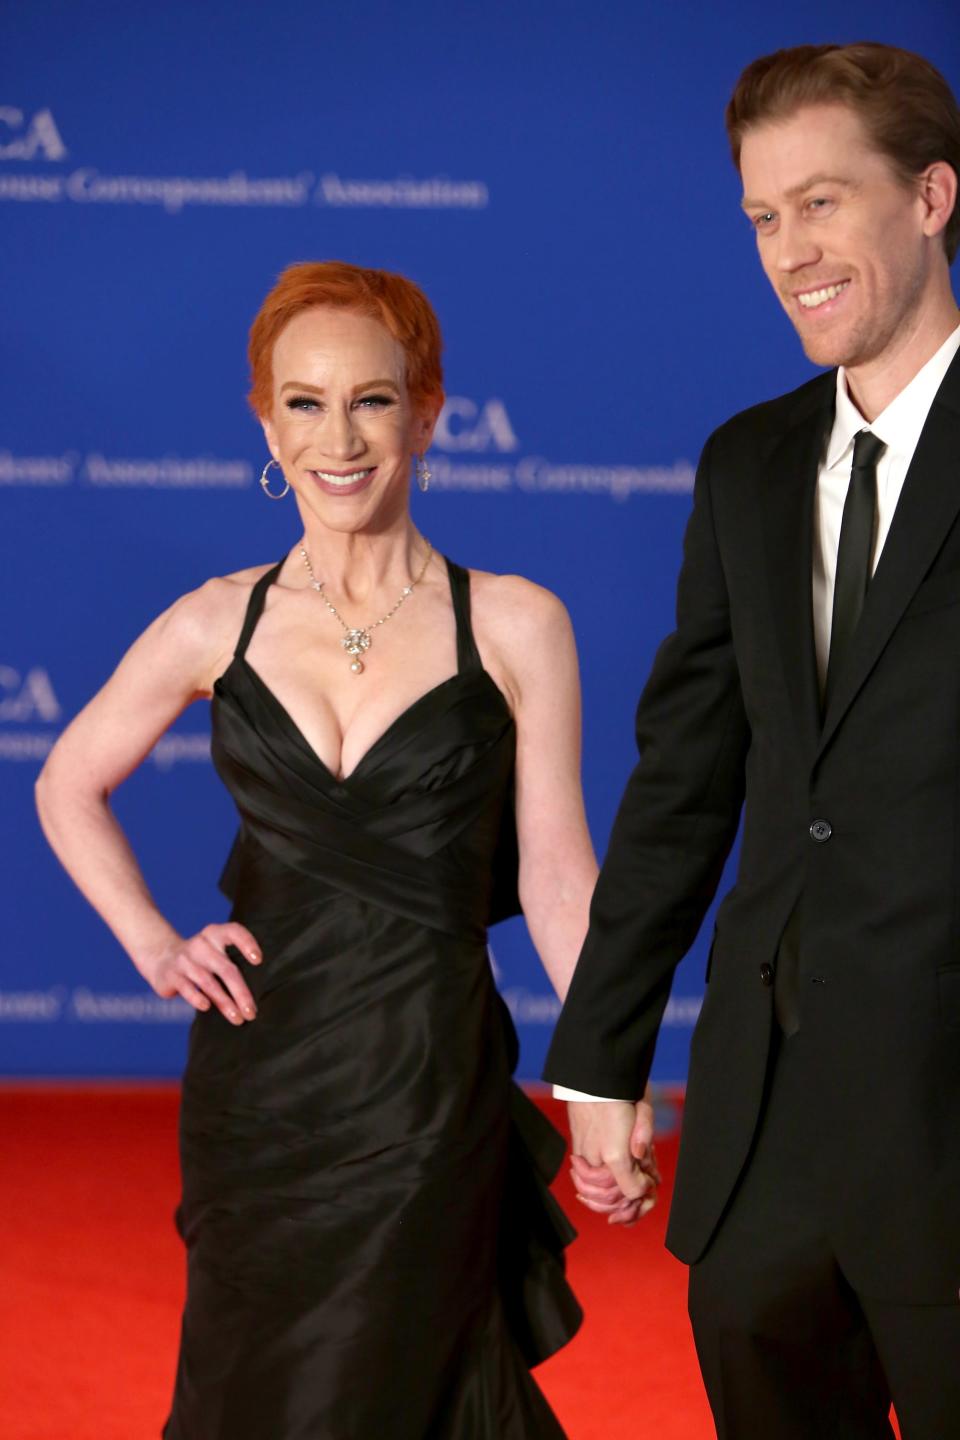 Kathy Griffin and Randy Bick attend the 2018 White House Correspondents' Dinner on April 28, 2018 in Washington, DC.